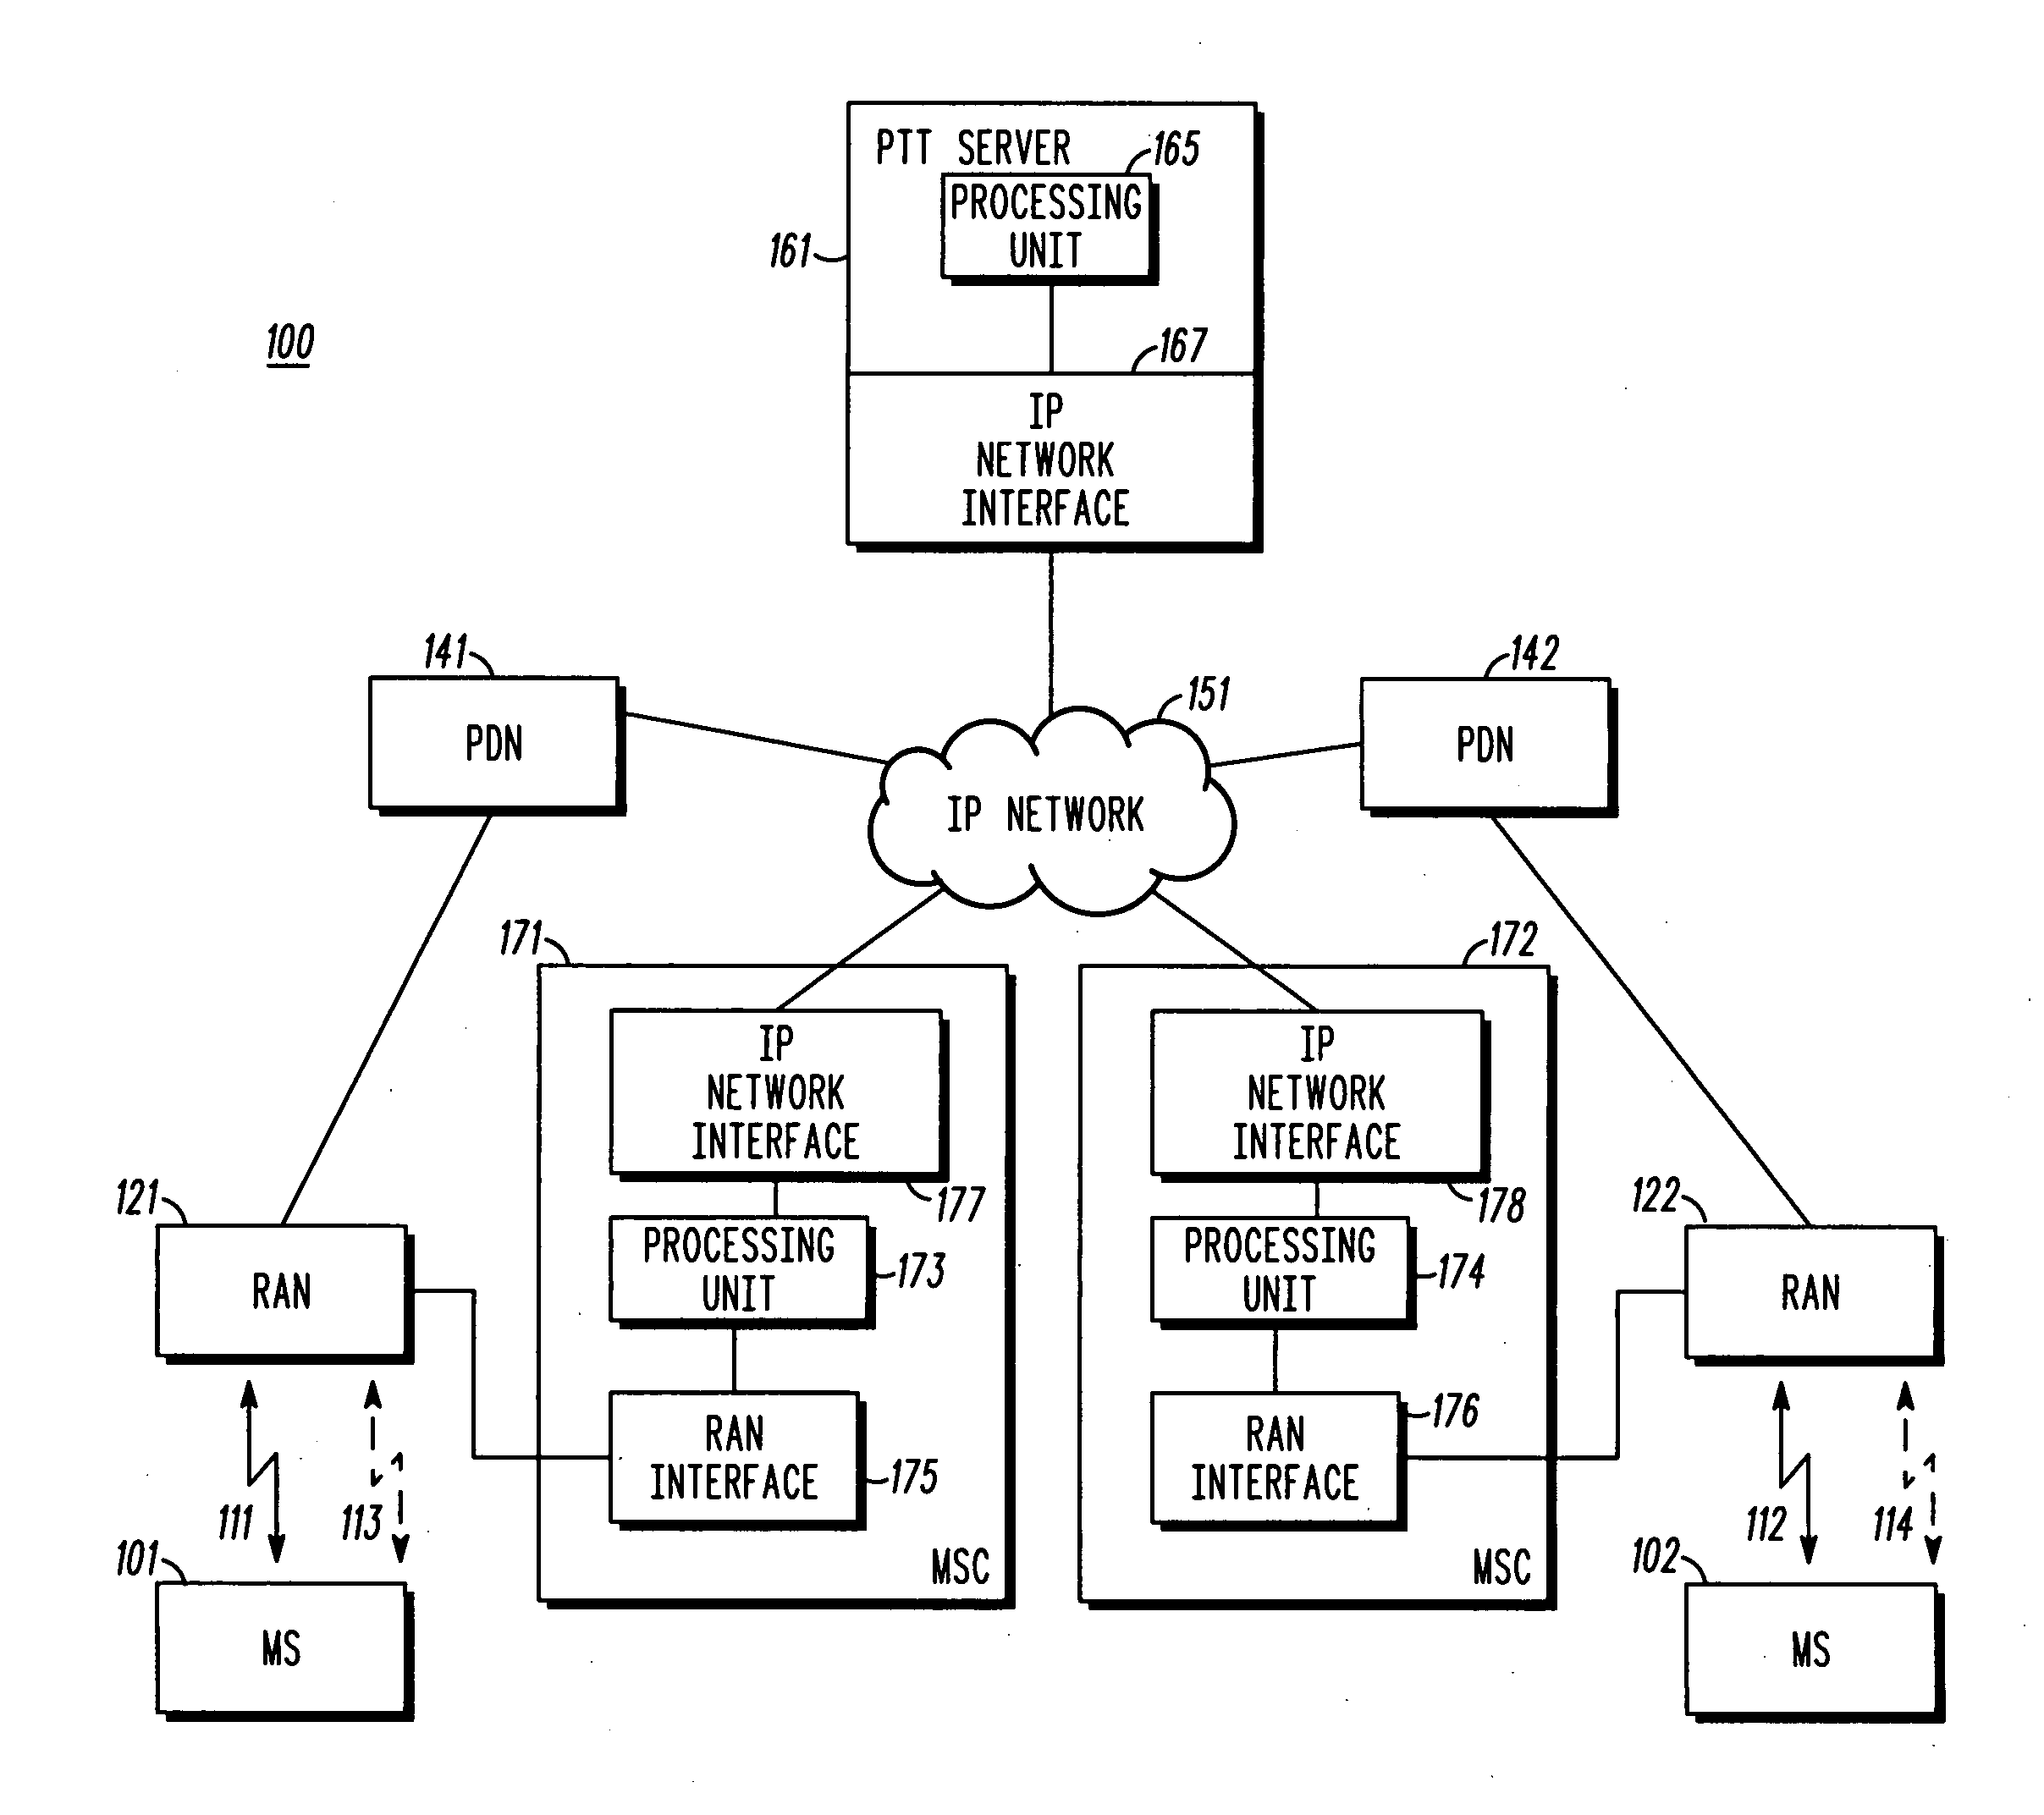 Method and apparatus for facilitating PTT session initiation and service interaction using an IP-based protocol